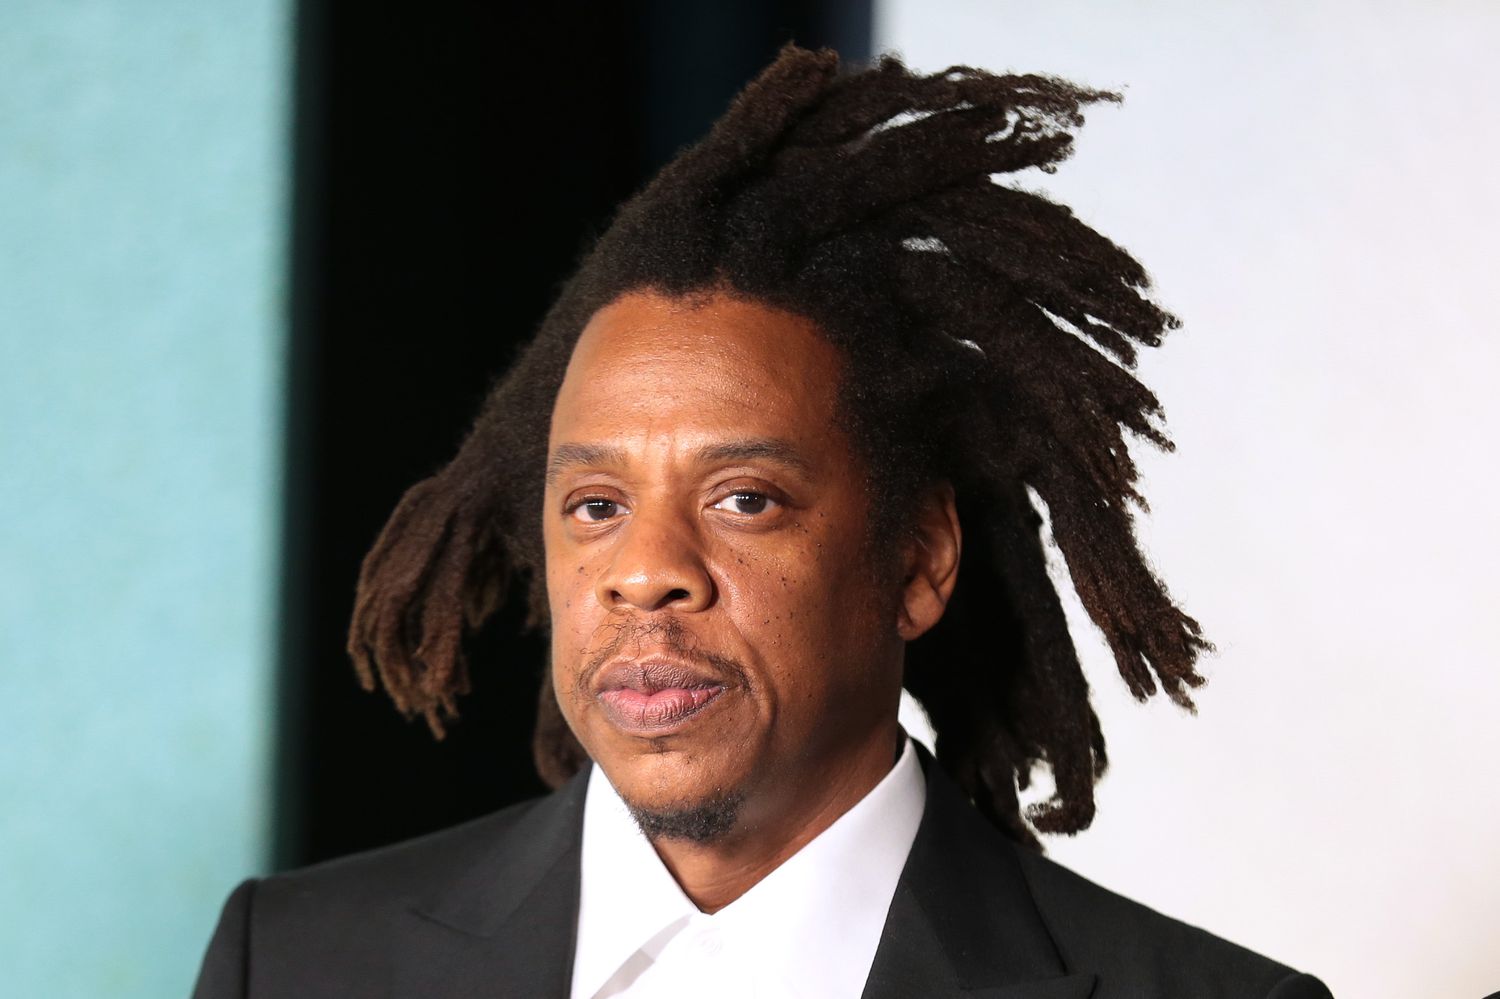 The Surprising Reason Why Jay Z’s Attractiveness Sparks Heated Debates